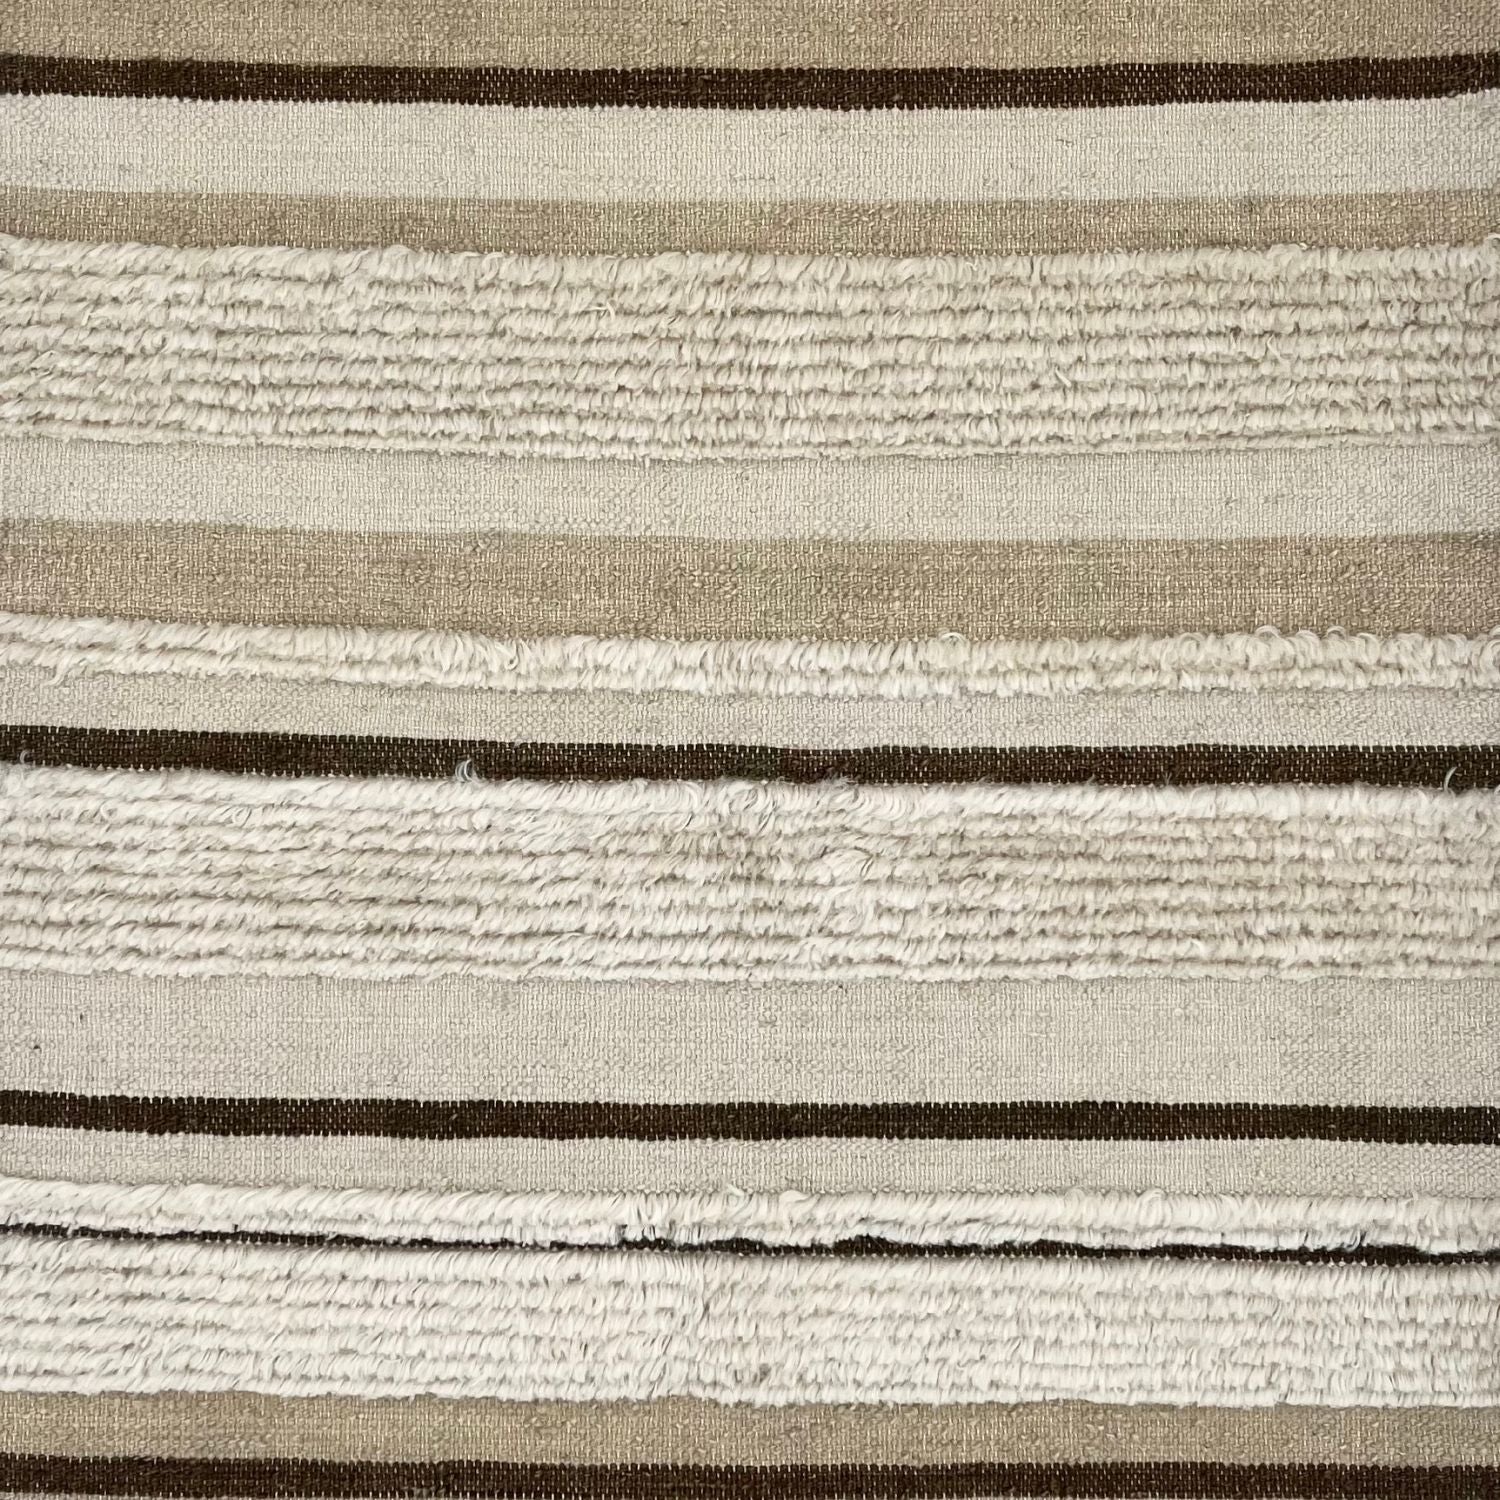 Detail of a flatwoven carpet with tan, beige and brown stripes, with a wide fringed stripe throughout.